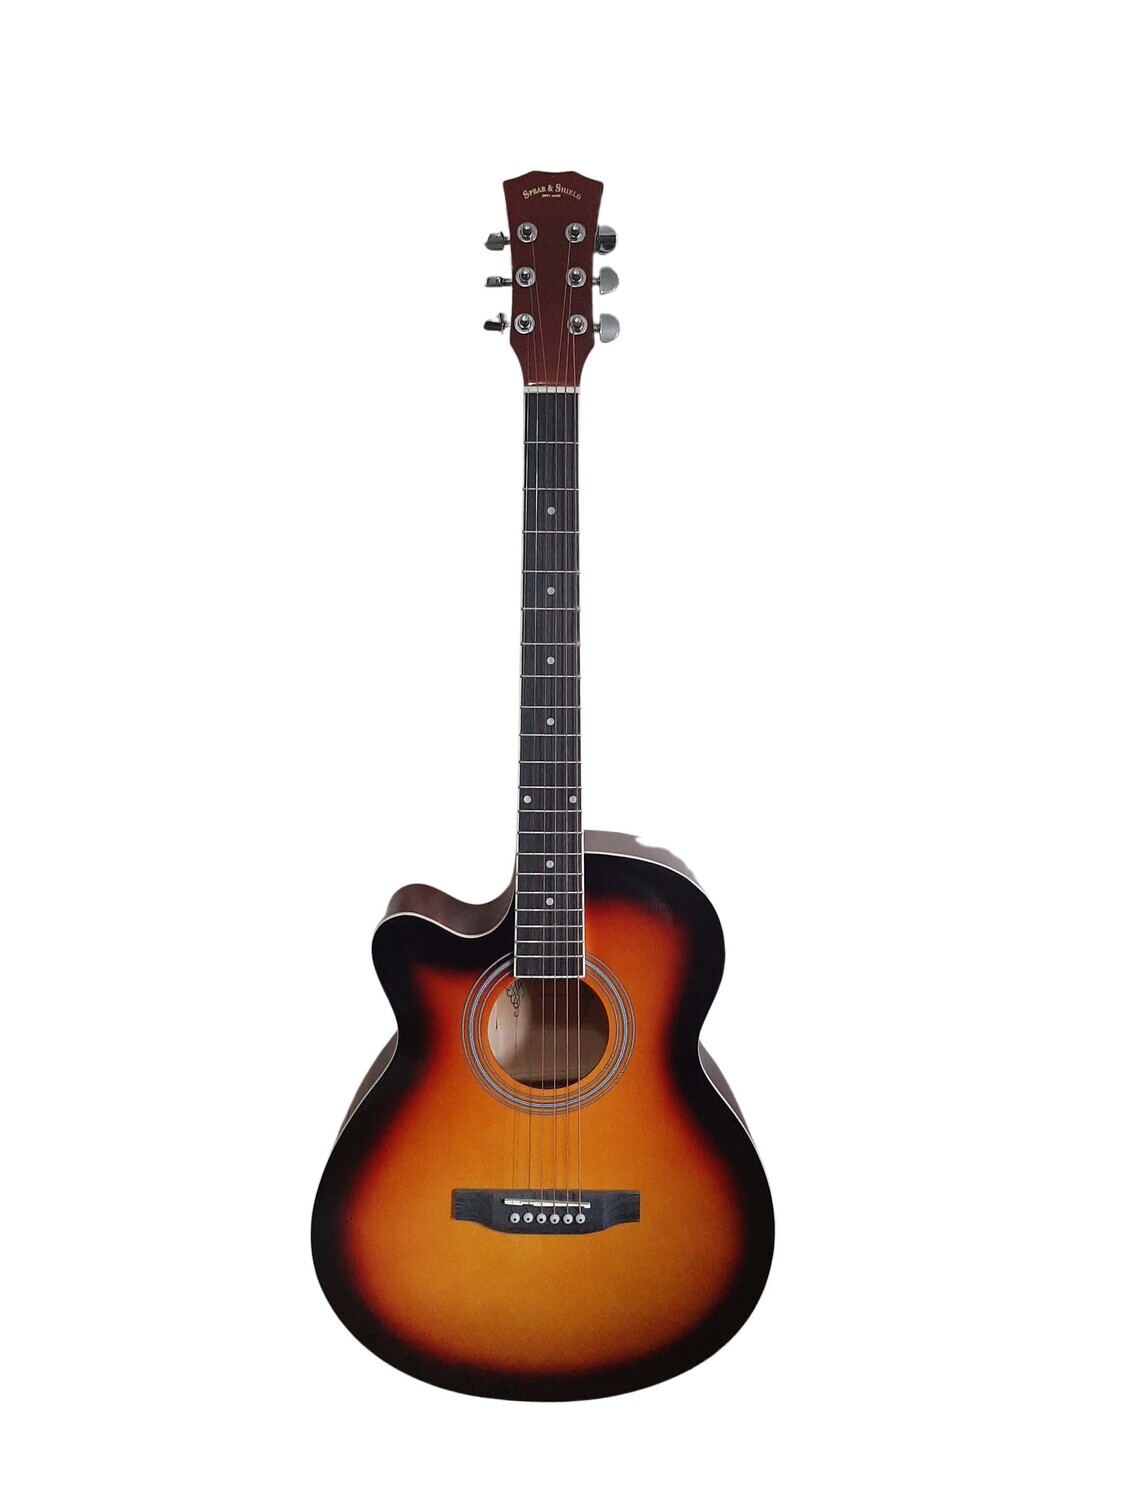 Spear & Shield Left handed Acoustic Guitar for Beginners Adults Students 40-inch Full-size Sunburst SPS376LF Free Shipping